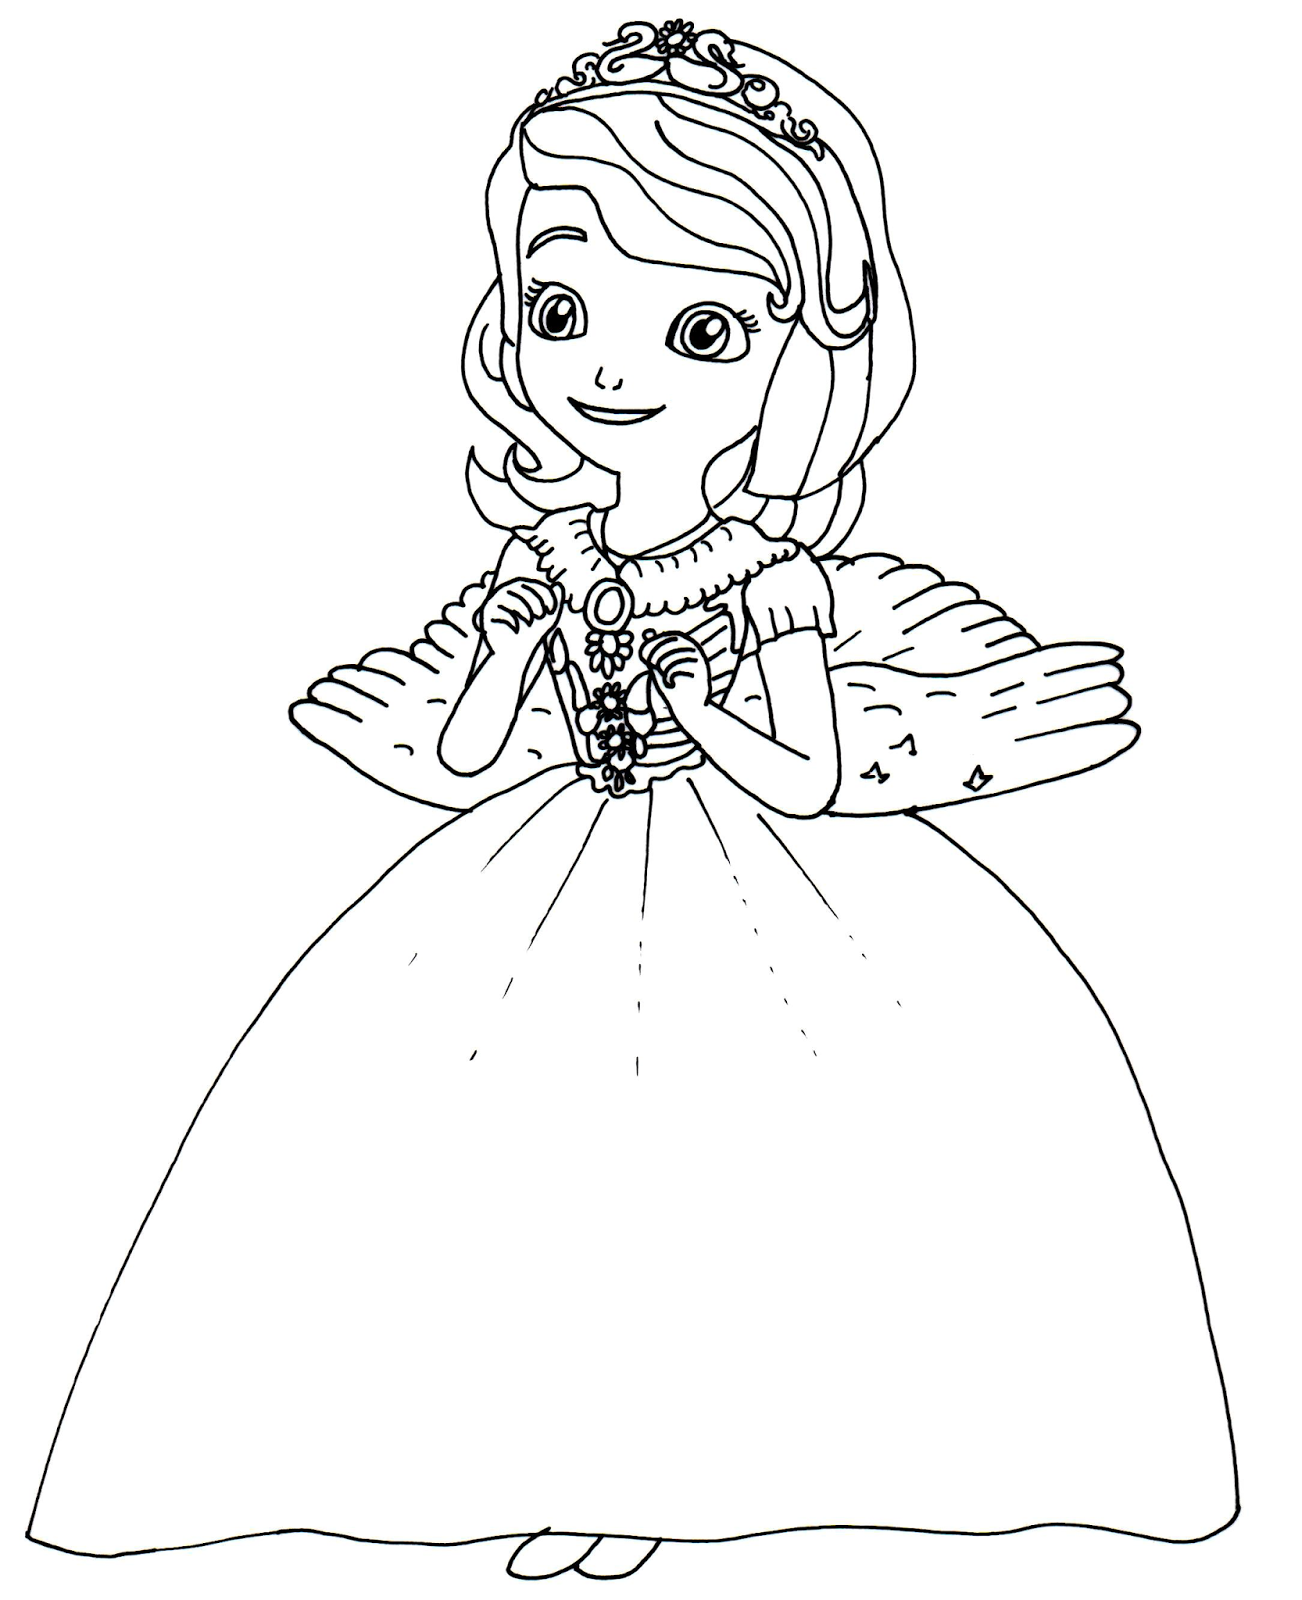 Sofia The First Coloring Pages Halloween Costume   Sofia The ...